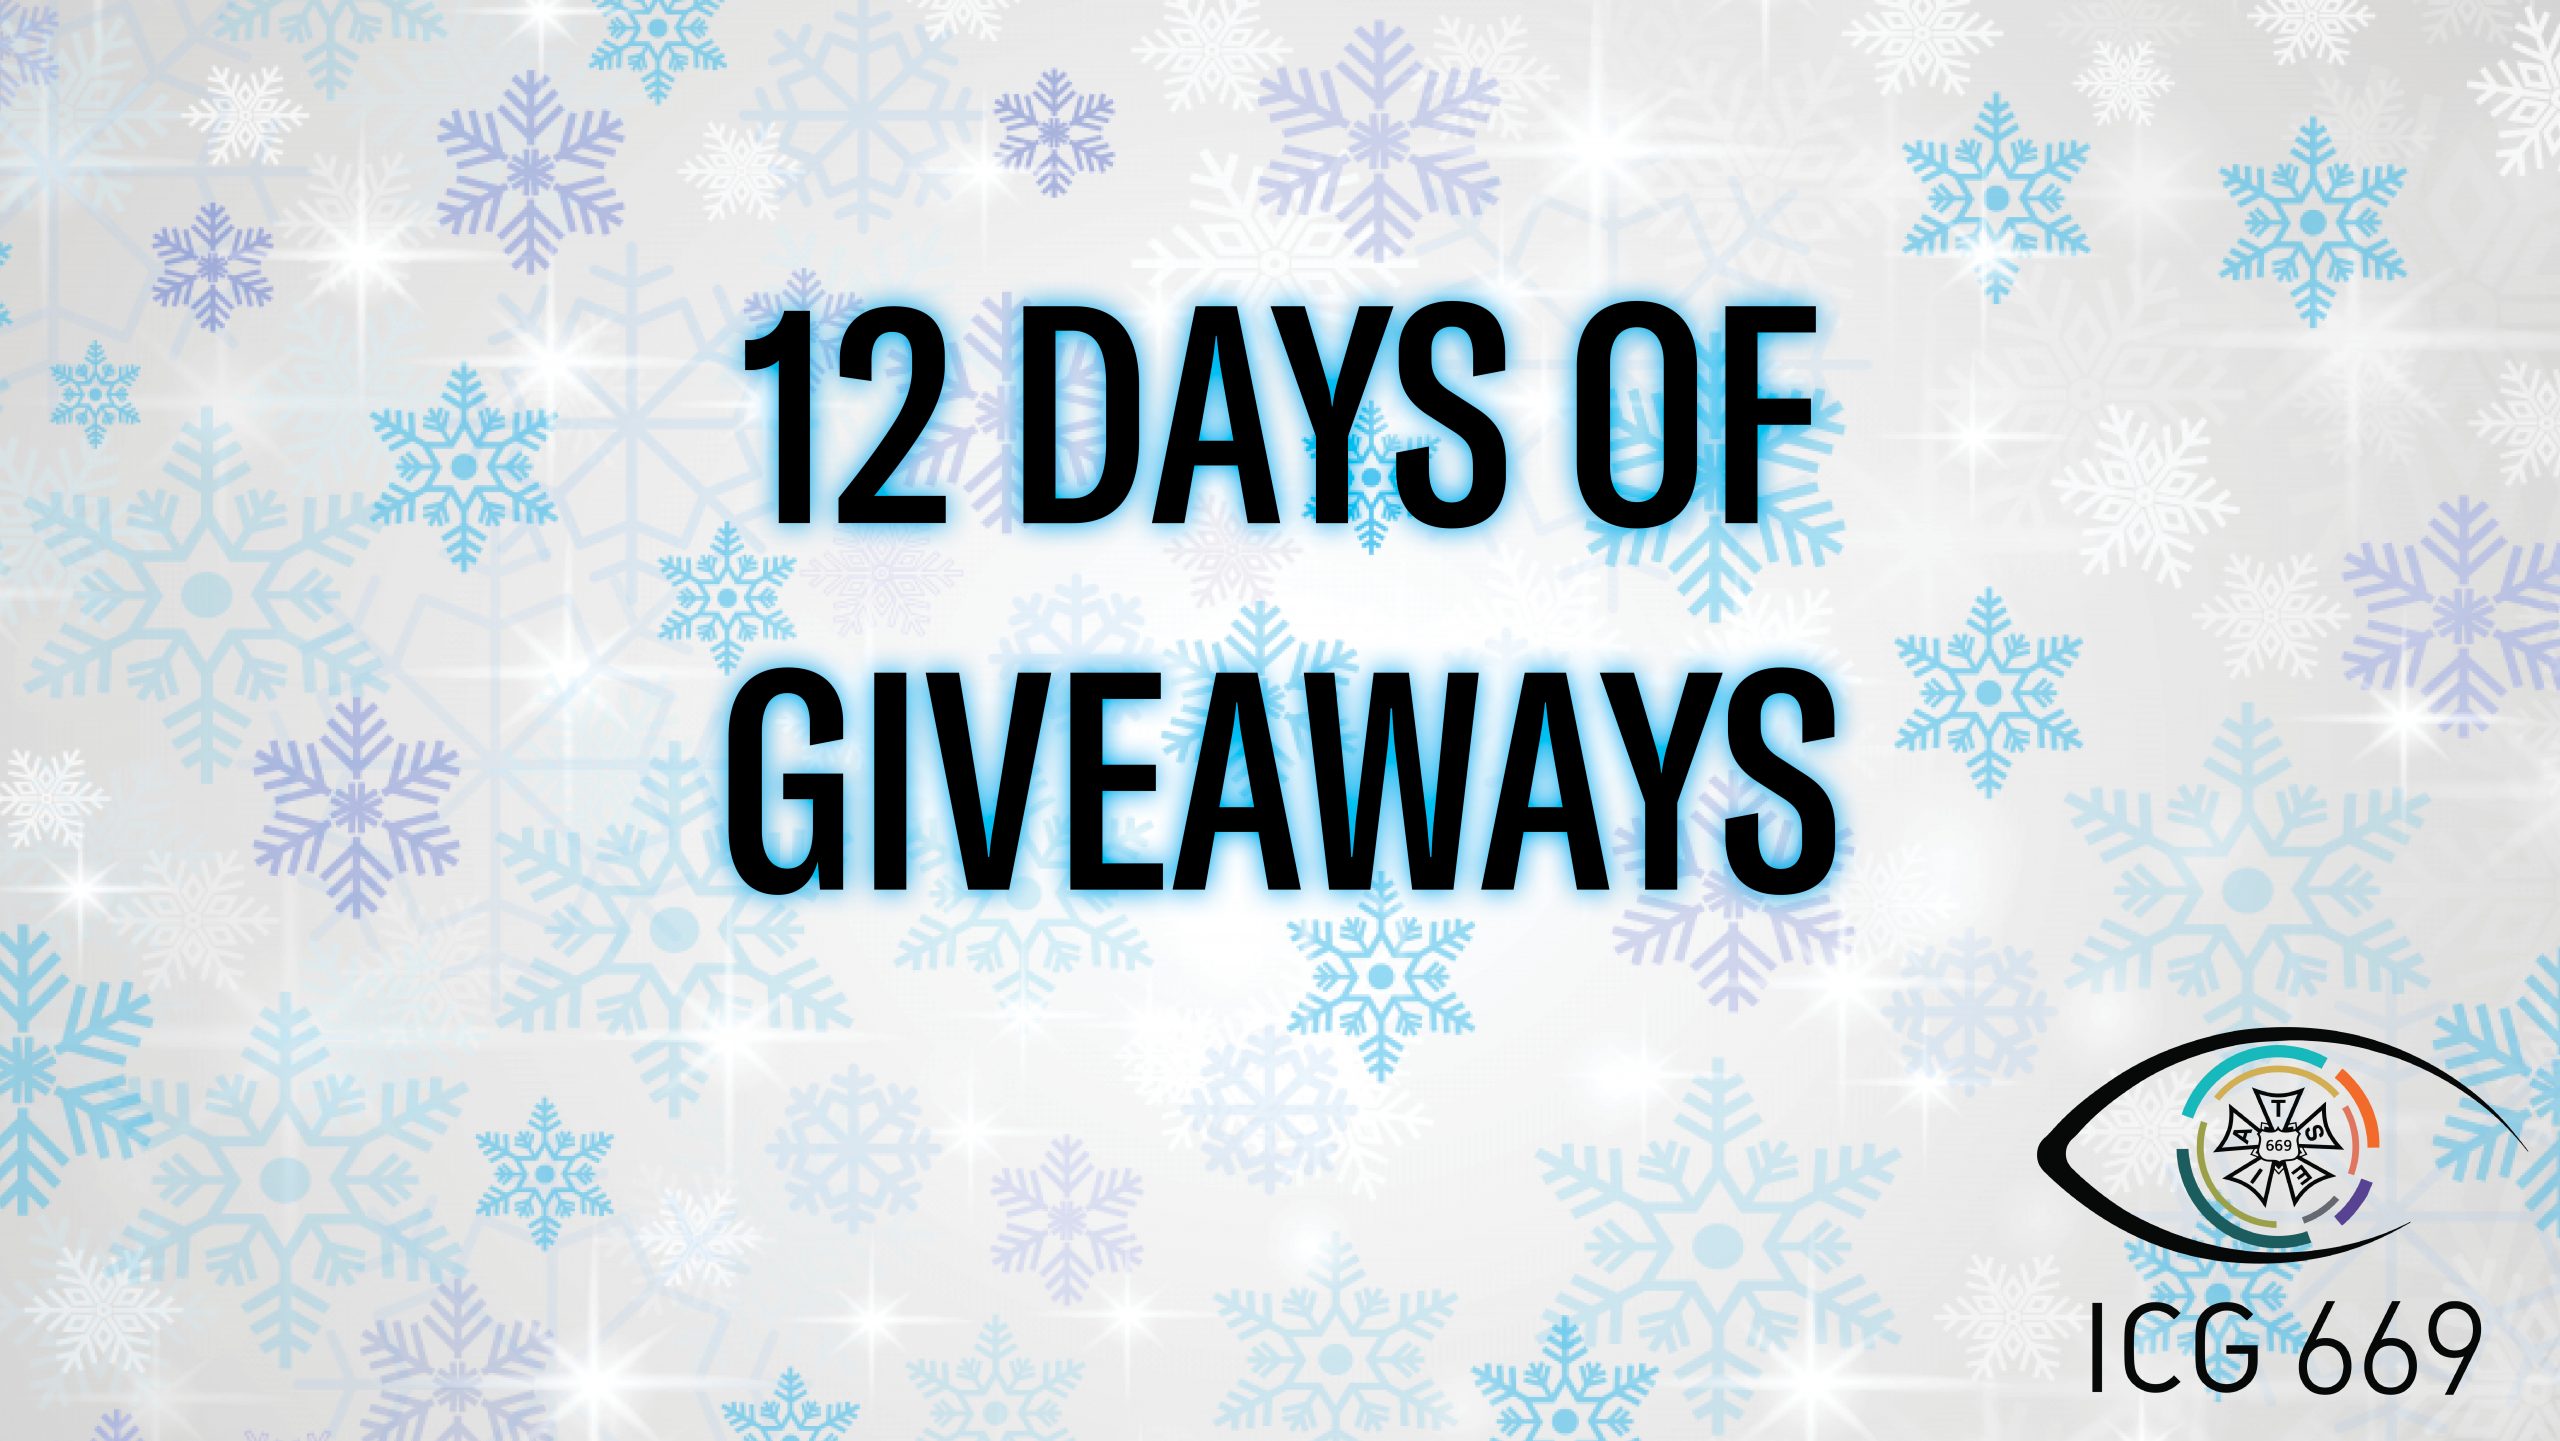 12 Days of Giveaways